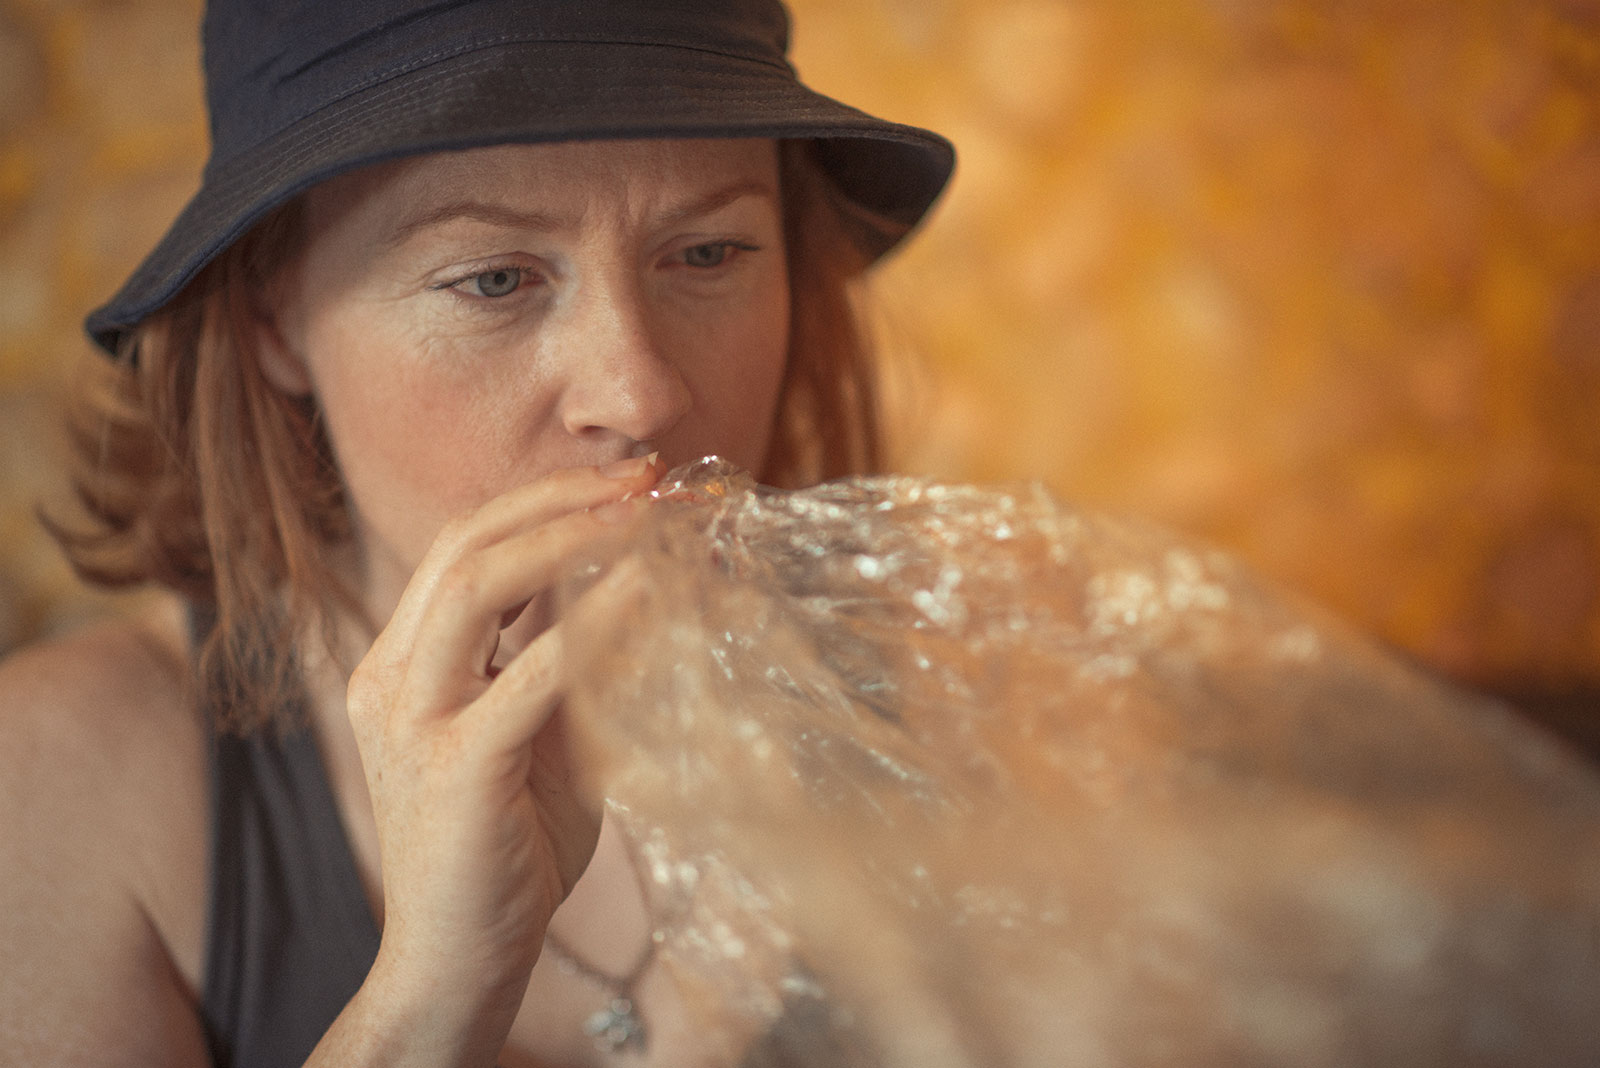 Naturopath Lisa Fitzgibbon experimenting with Marijuana in a Coffee Show in Amsterdam